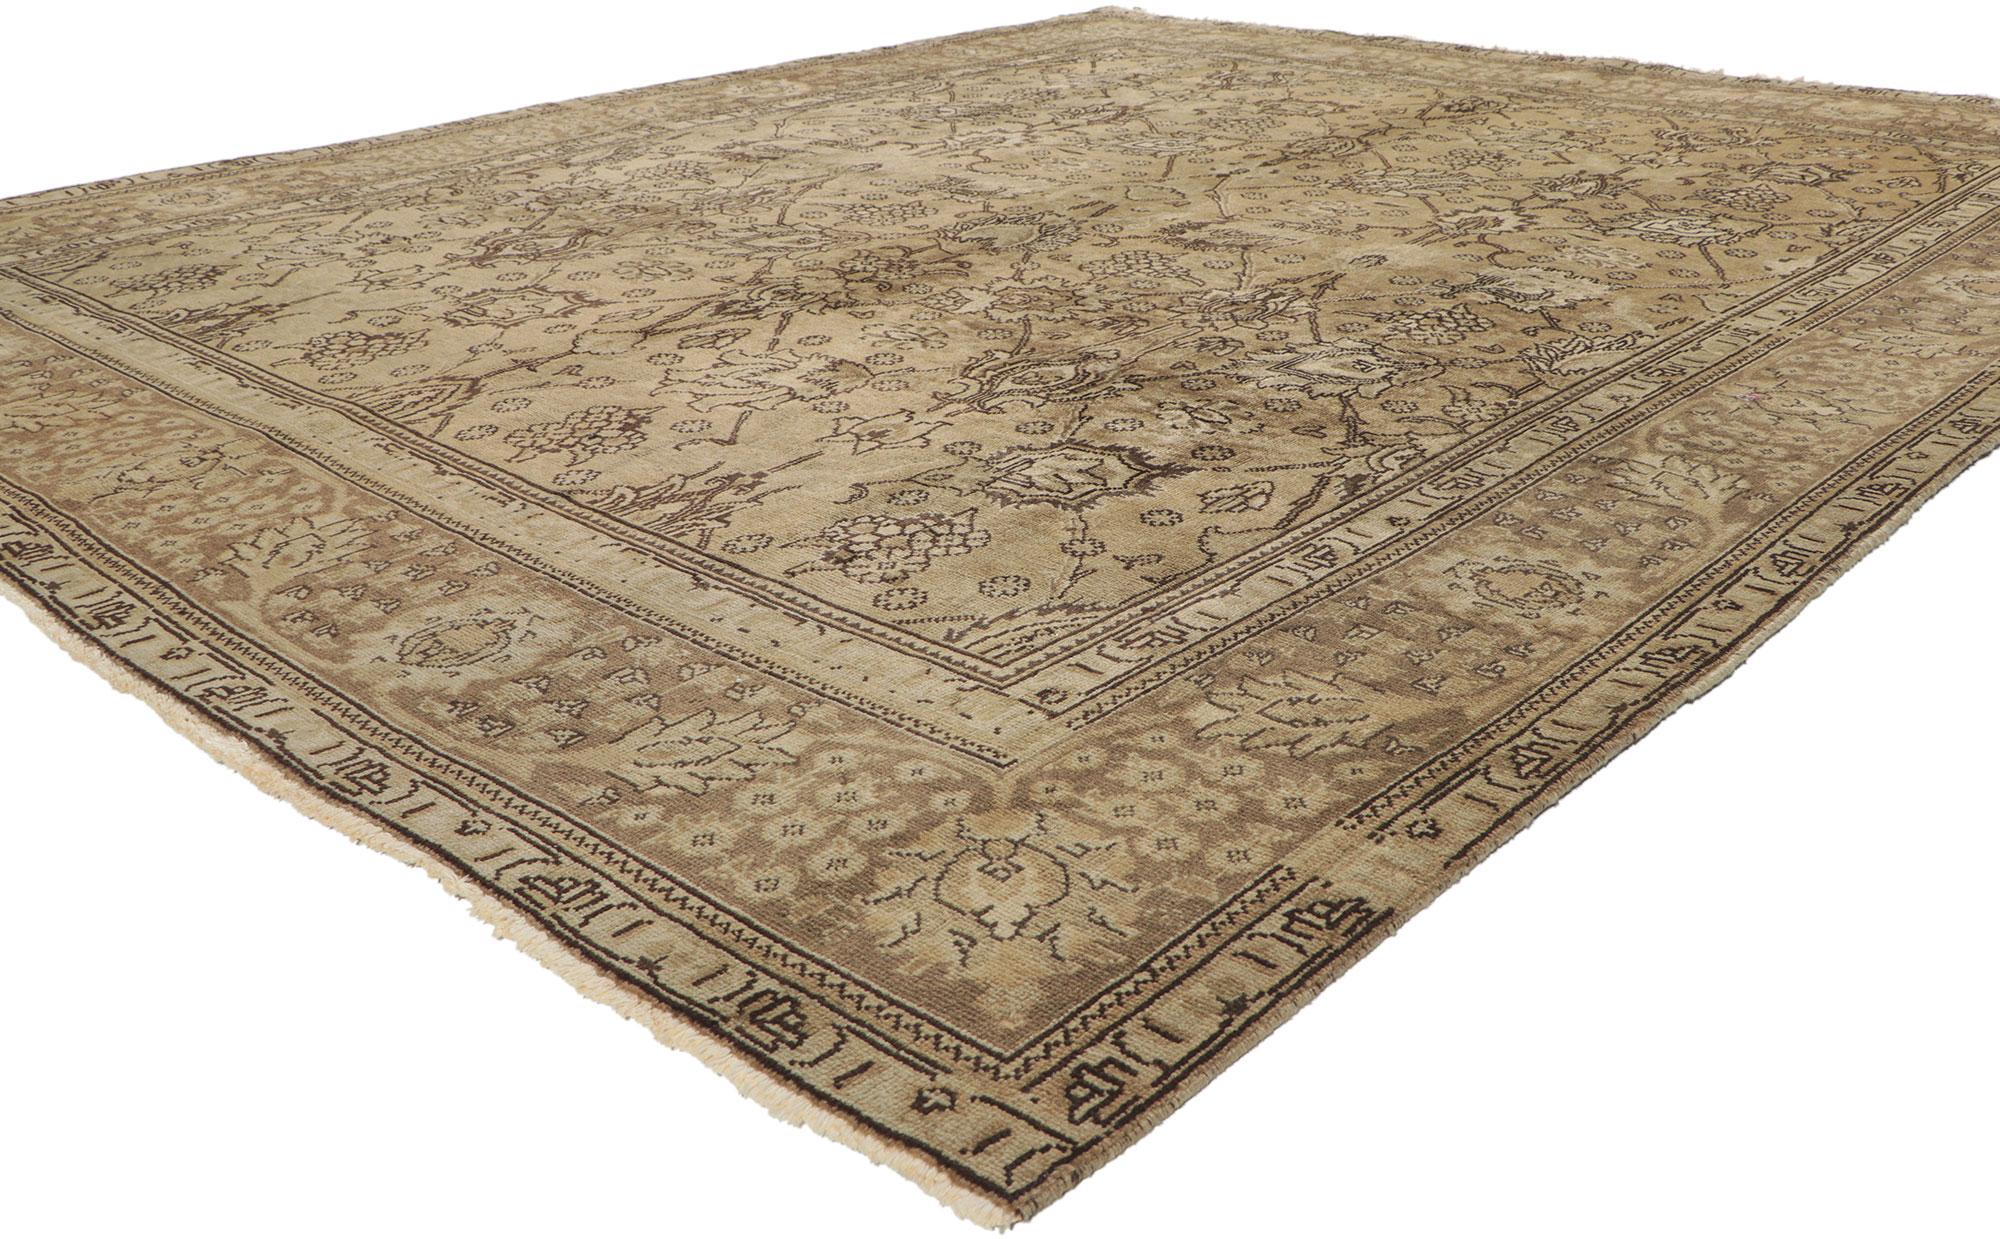 75529 vintage Persian Tabriz rug with traditional style. This hand-knotted wool vintage Persian Tabriz rug features an allover pattern surrounded by a classic border creating a well-balanced and timeless design. This vintage Persian Tabriz rug